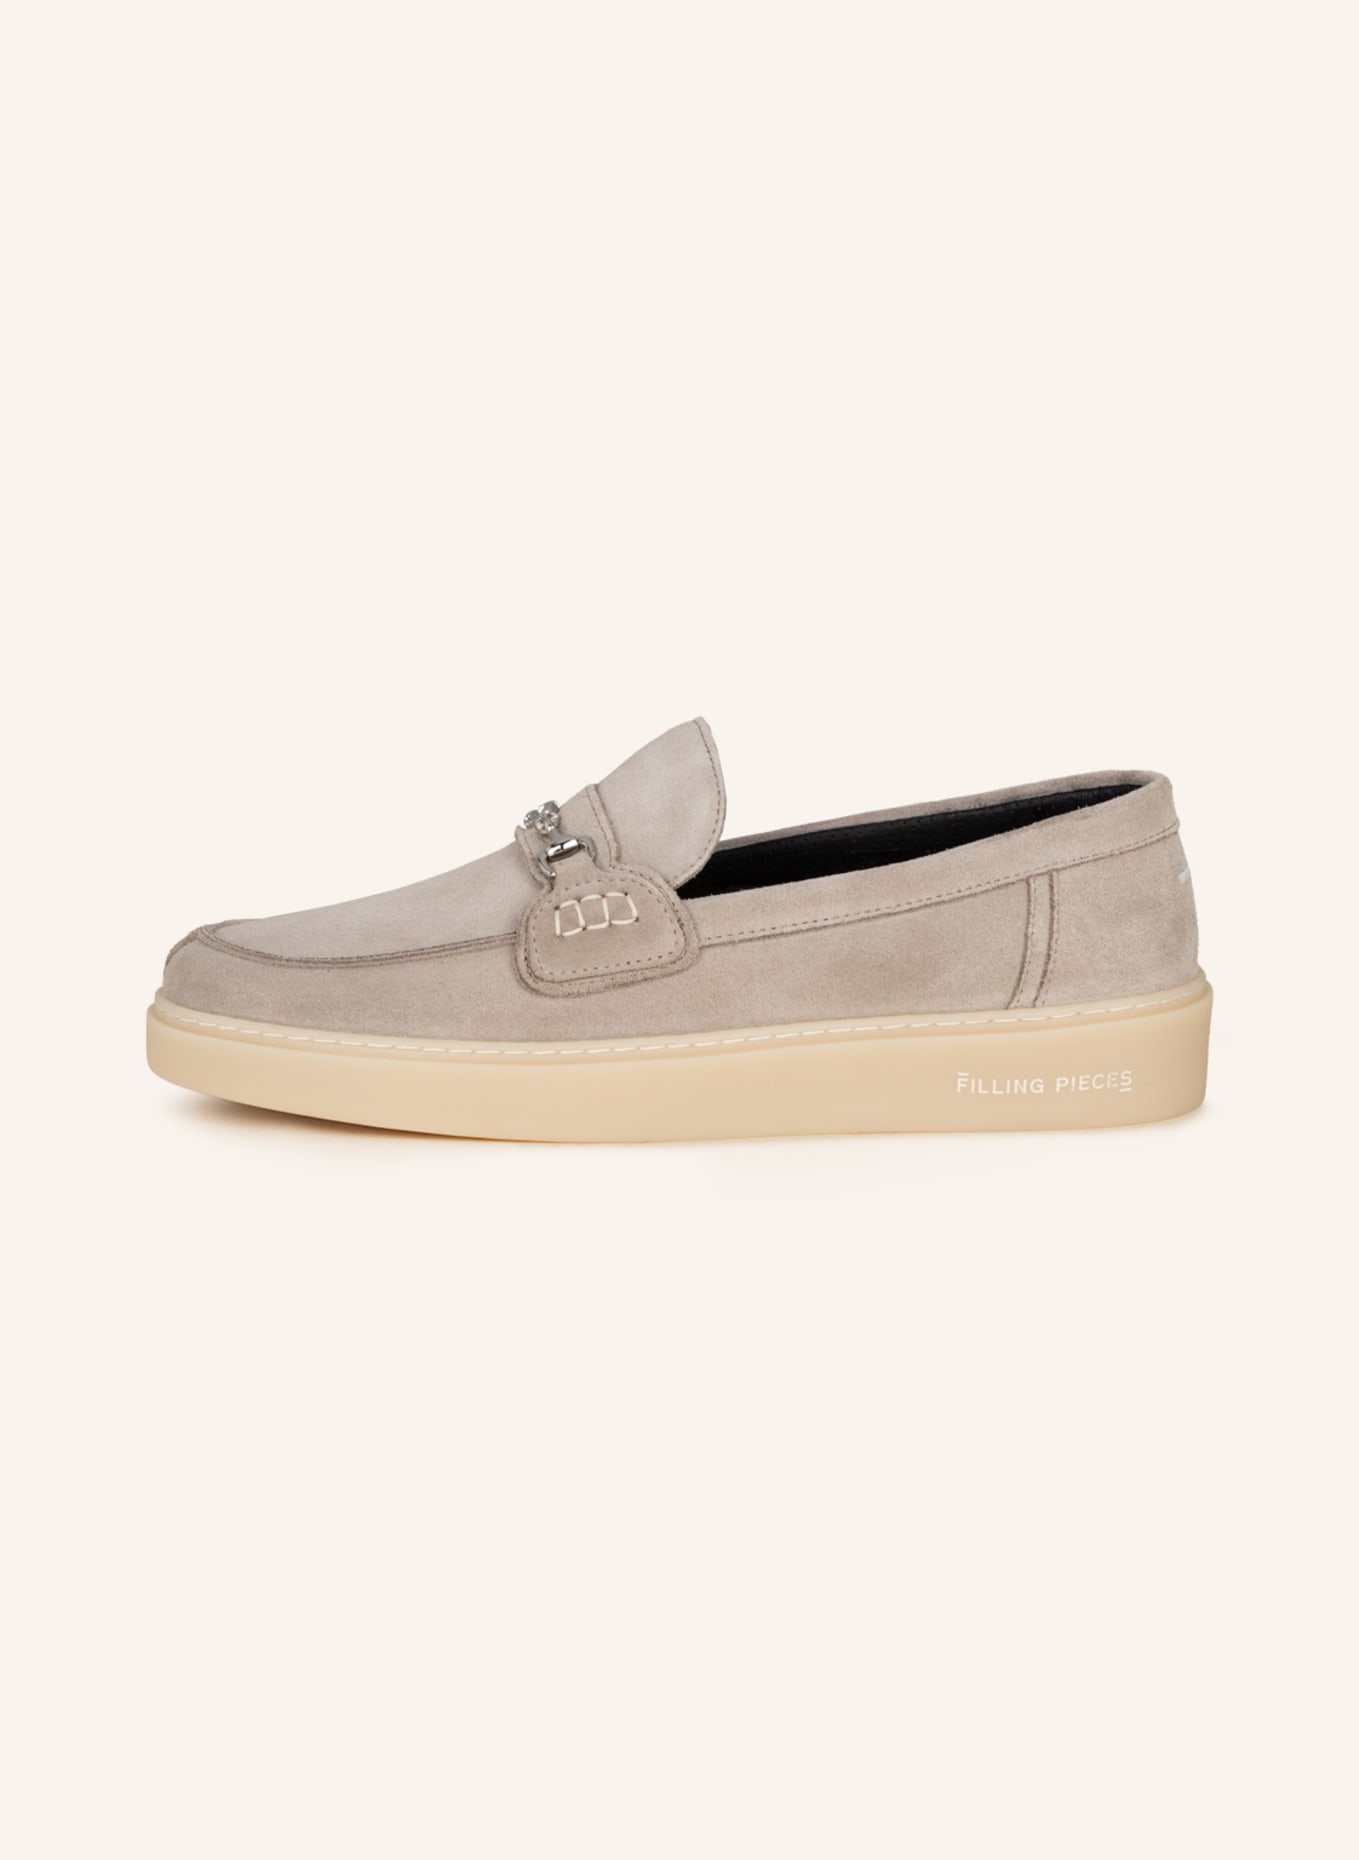 FILLING PIECES Loafer CORE, Farbe: TAUPE (Bild 4)